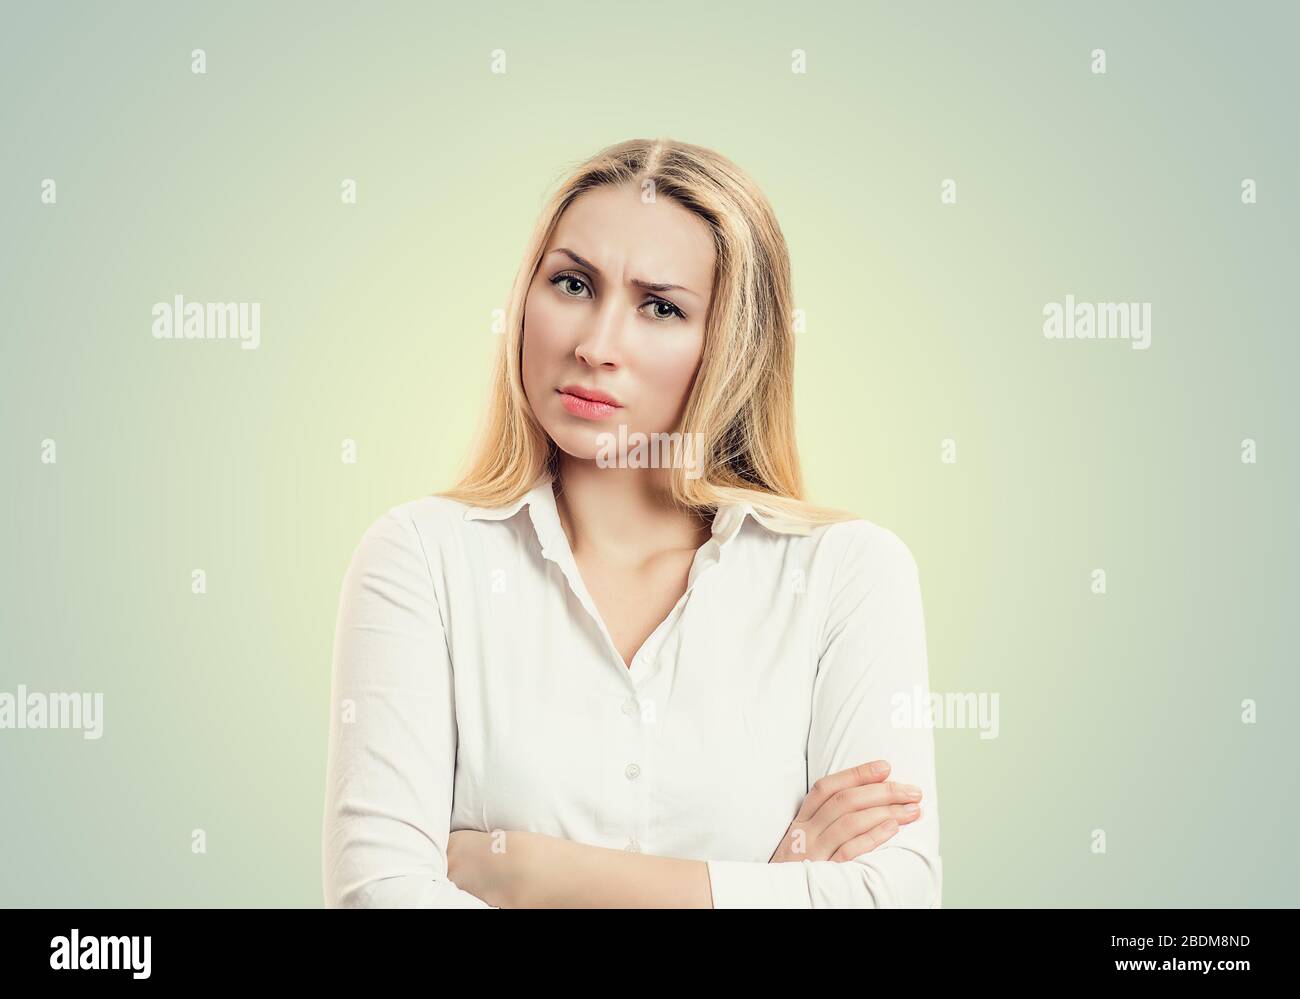 Closeup portrait, skeptical, serious senior young woman looking suspicious, disapproval on face, arms crossed folded, isolated white background. Negat Stock Photo